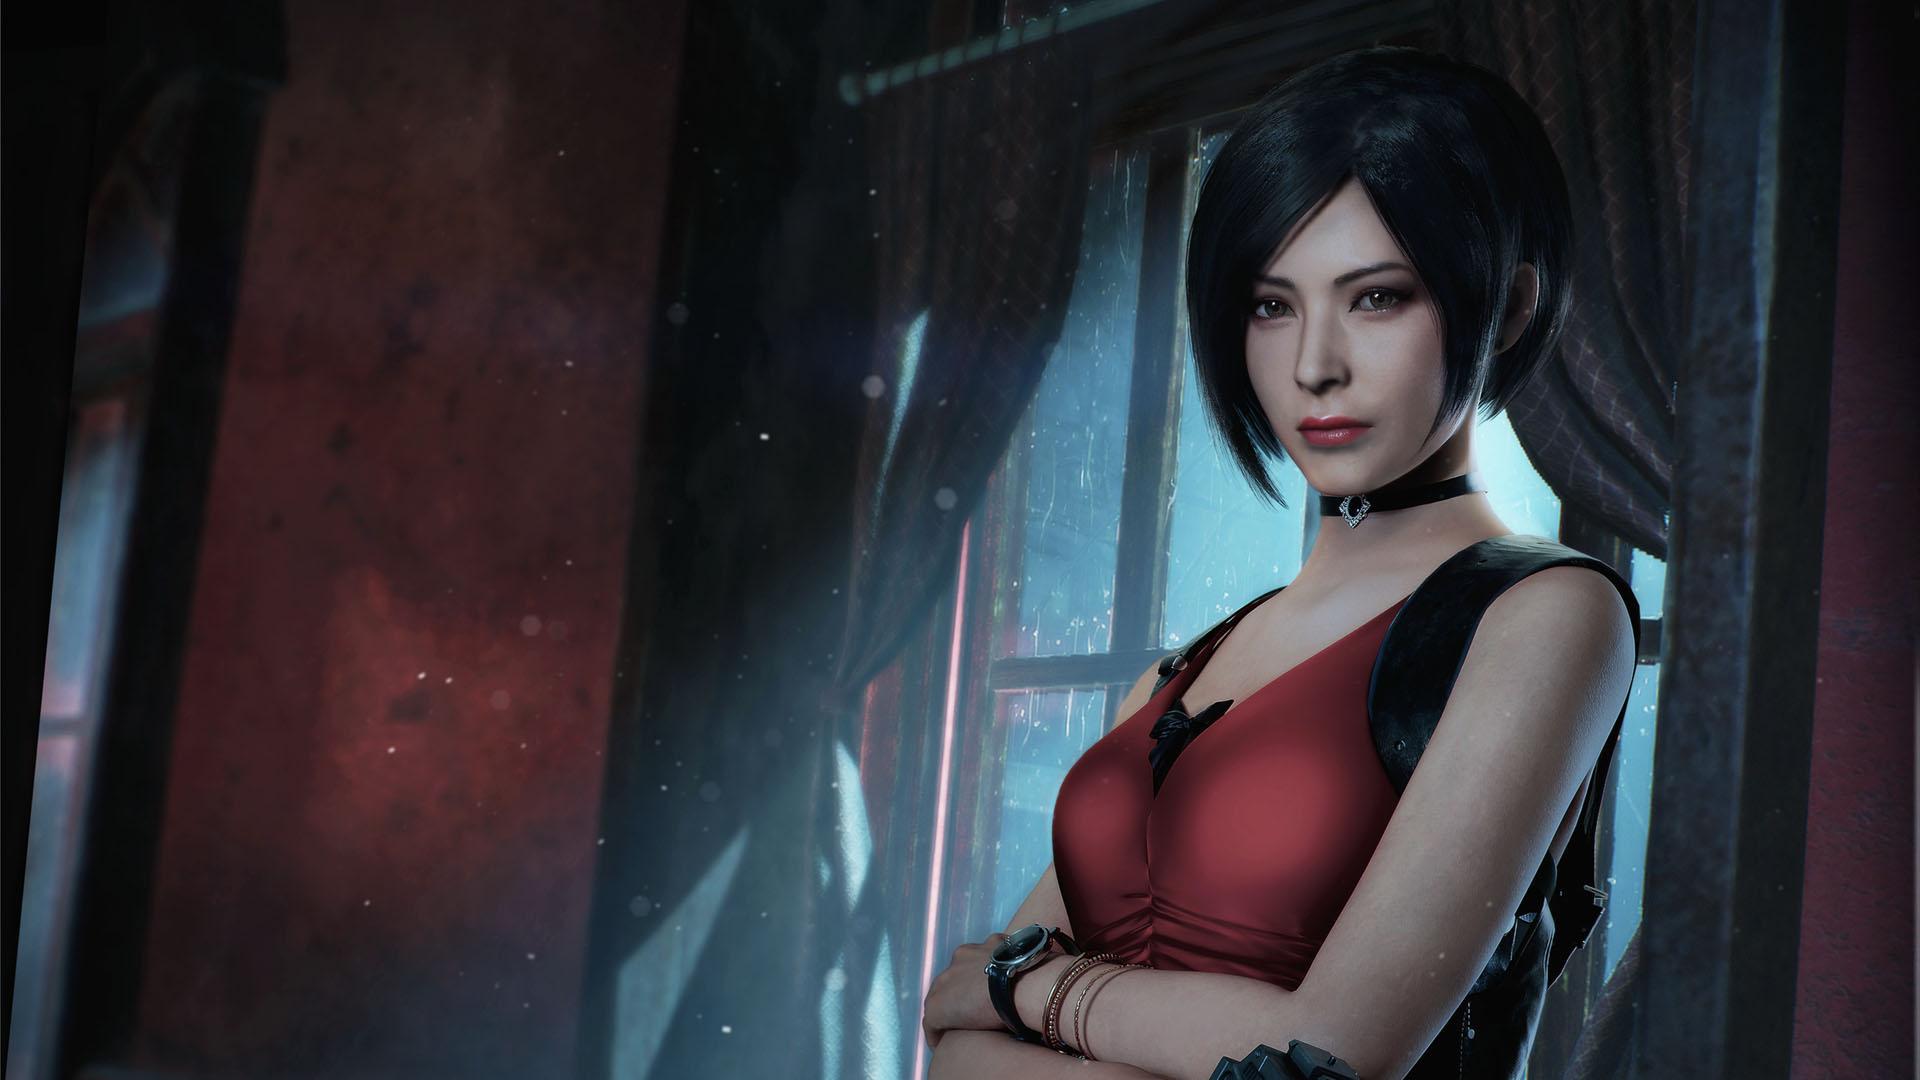 Ada Wong in coctail dress. Wallpaper from Resident Evil 2